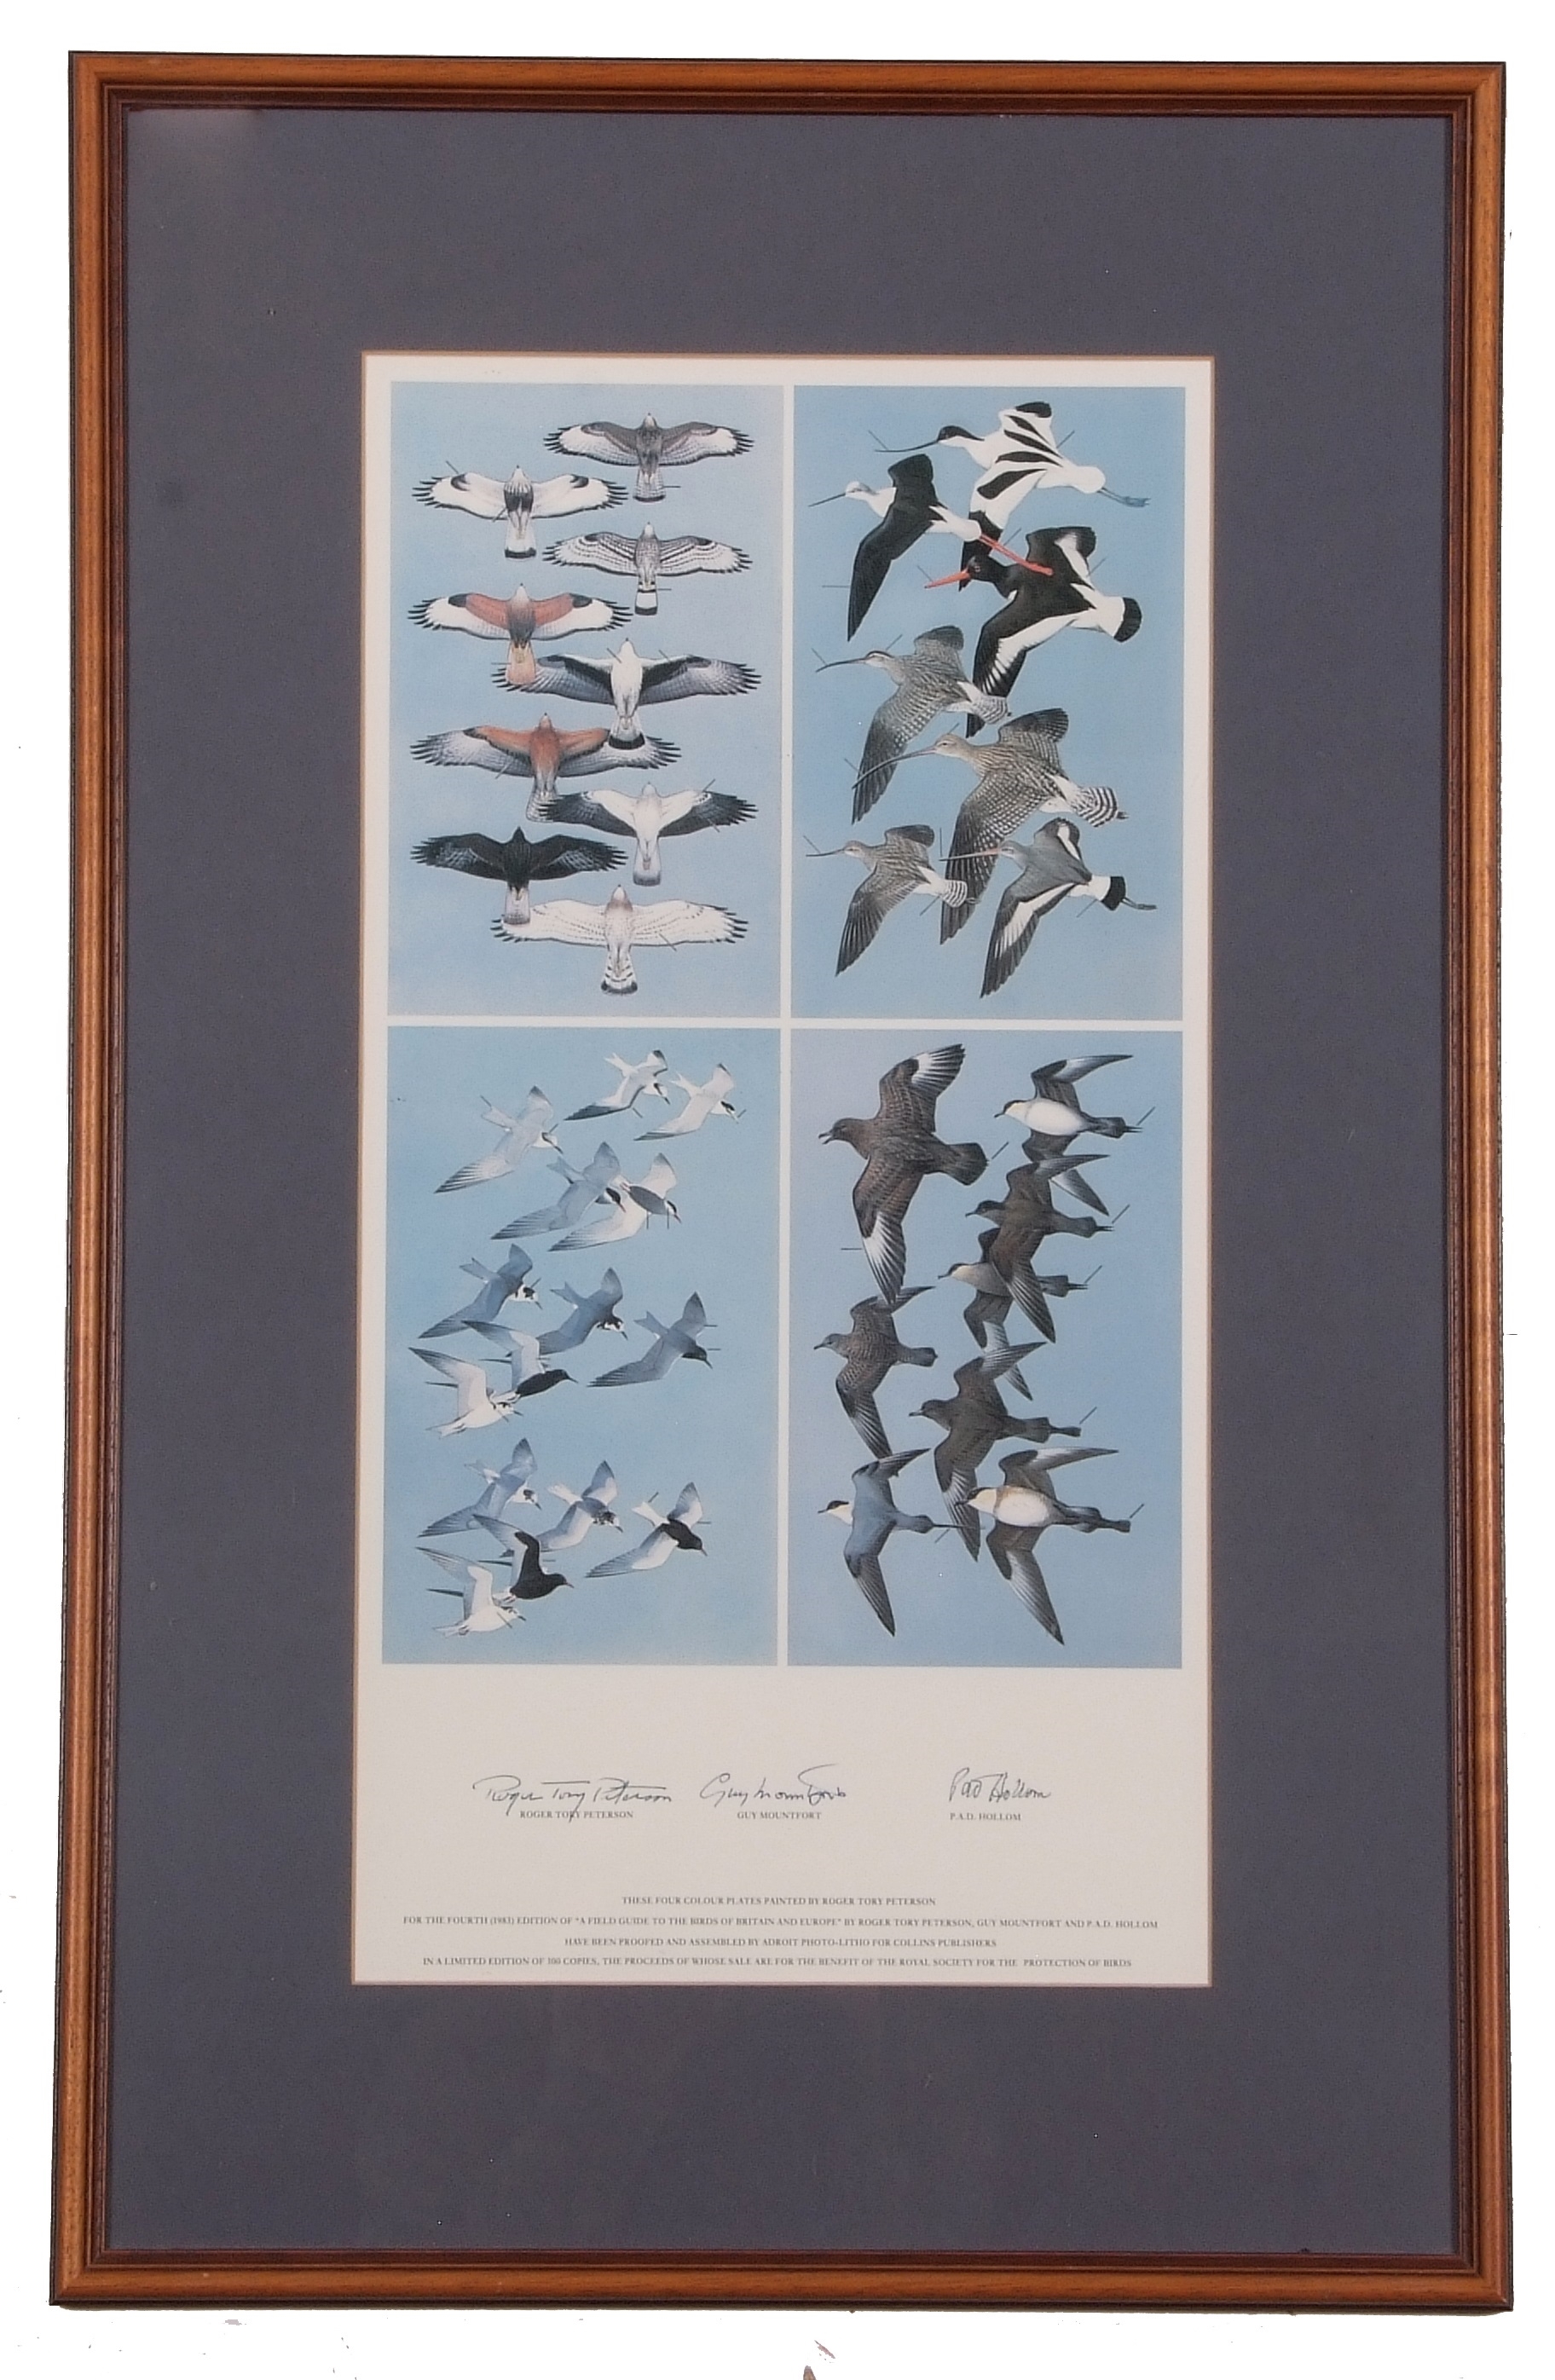 chromolithograph (in four plates) originally painted for the fourth edition of "A Field Guide to the Birds of Britain" - Roger Tory Peterson